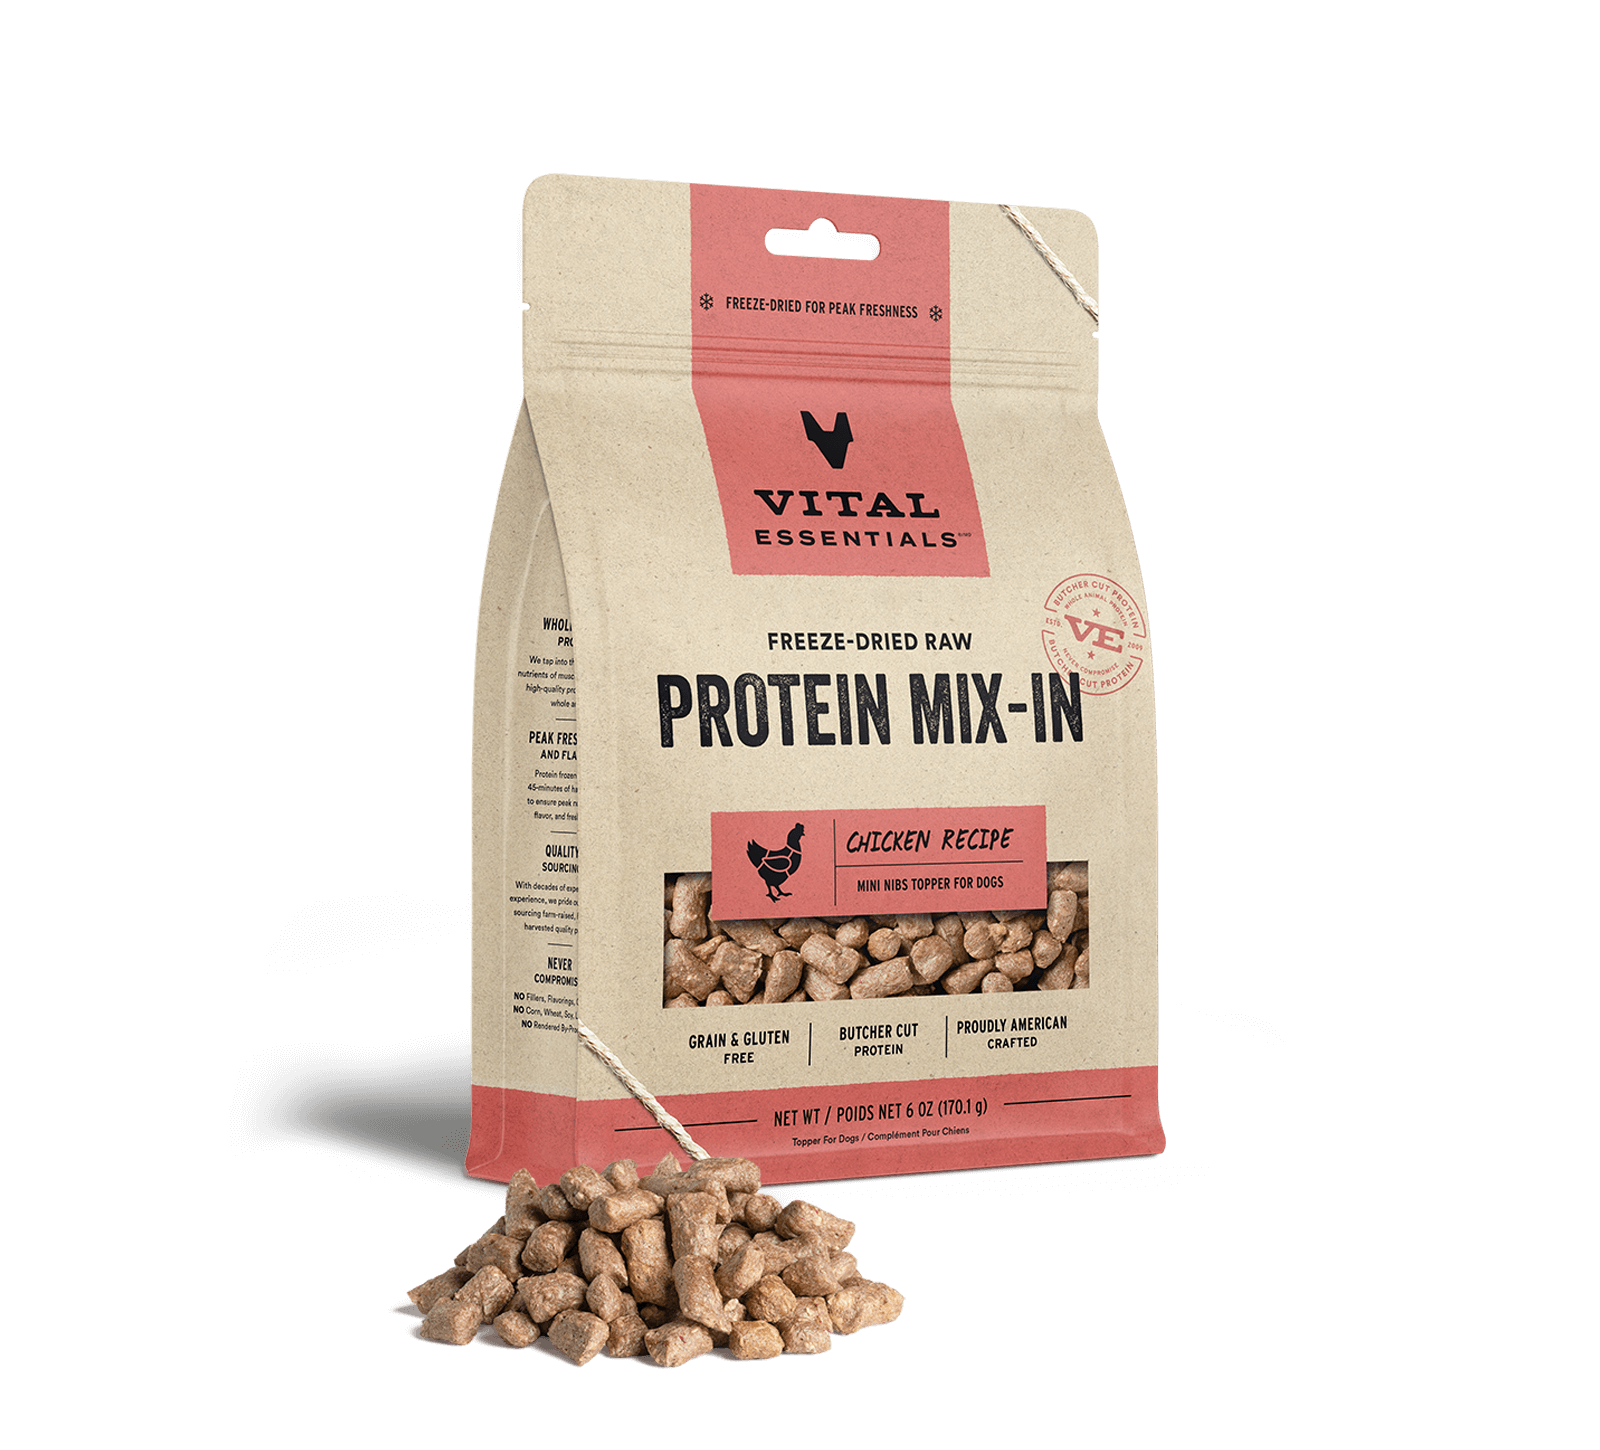 Vital Essentials Freeze-Dried Raw Protein Mix-In Chicken Recipe Mini Nibs Topper for Dogs, 6 oz - Treats